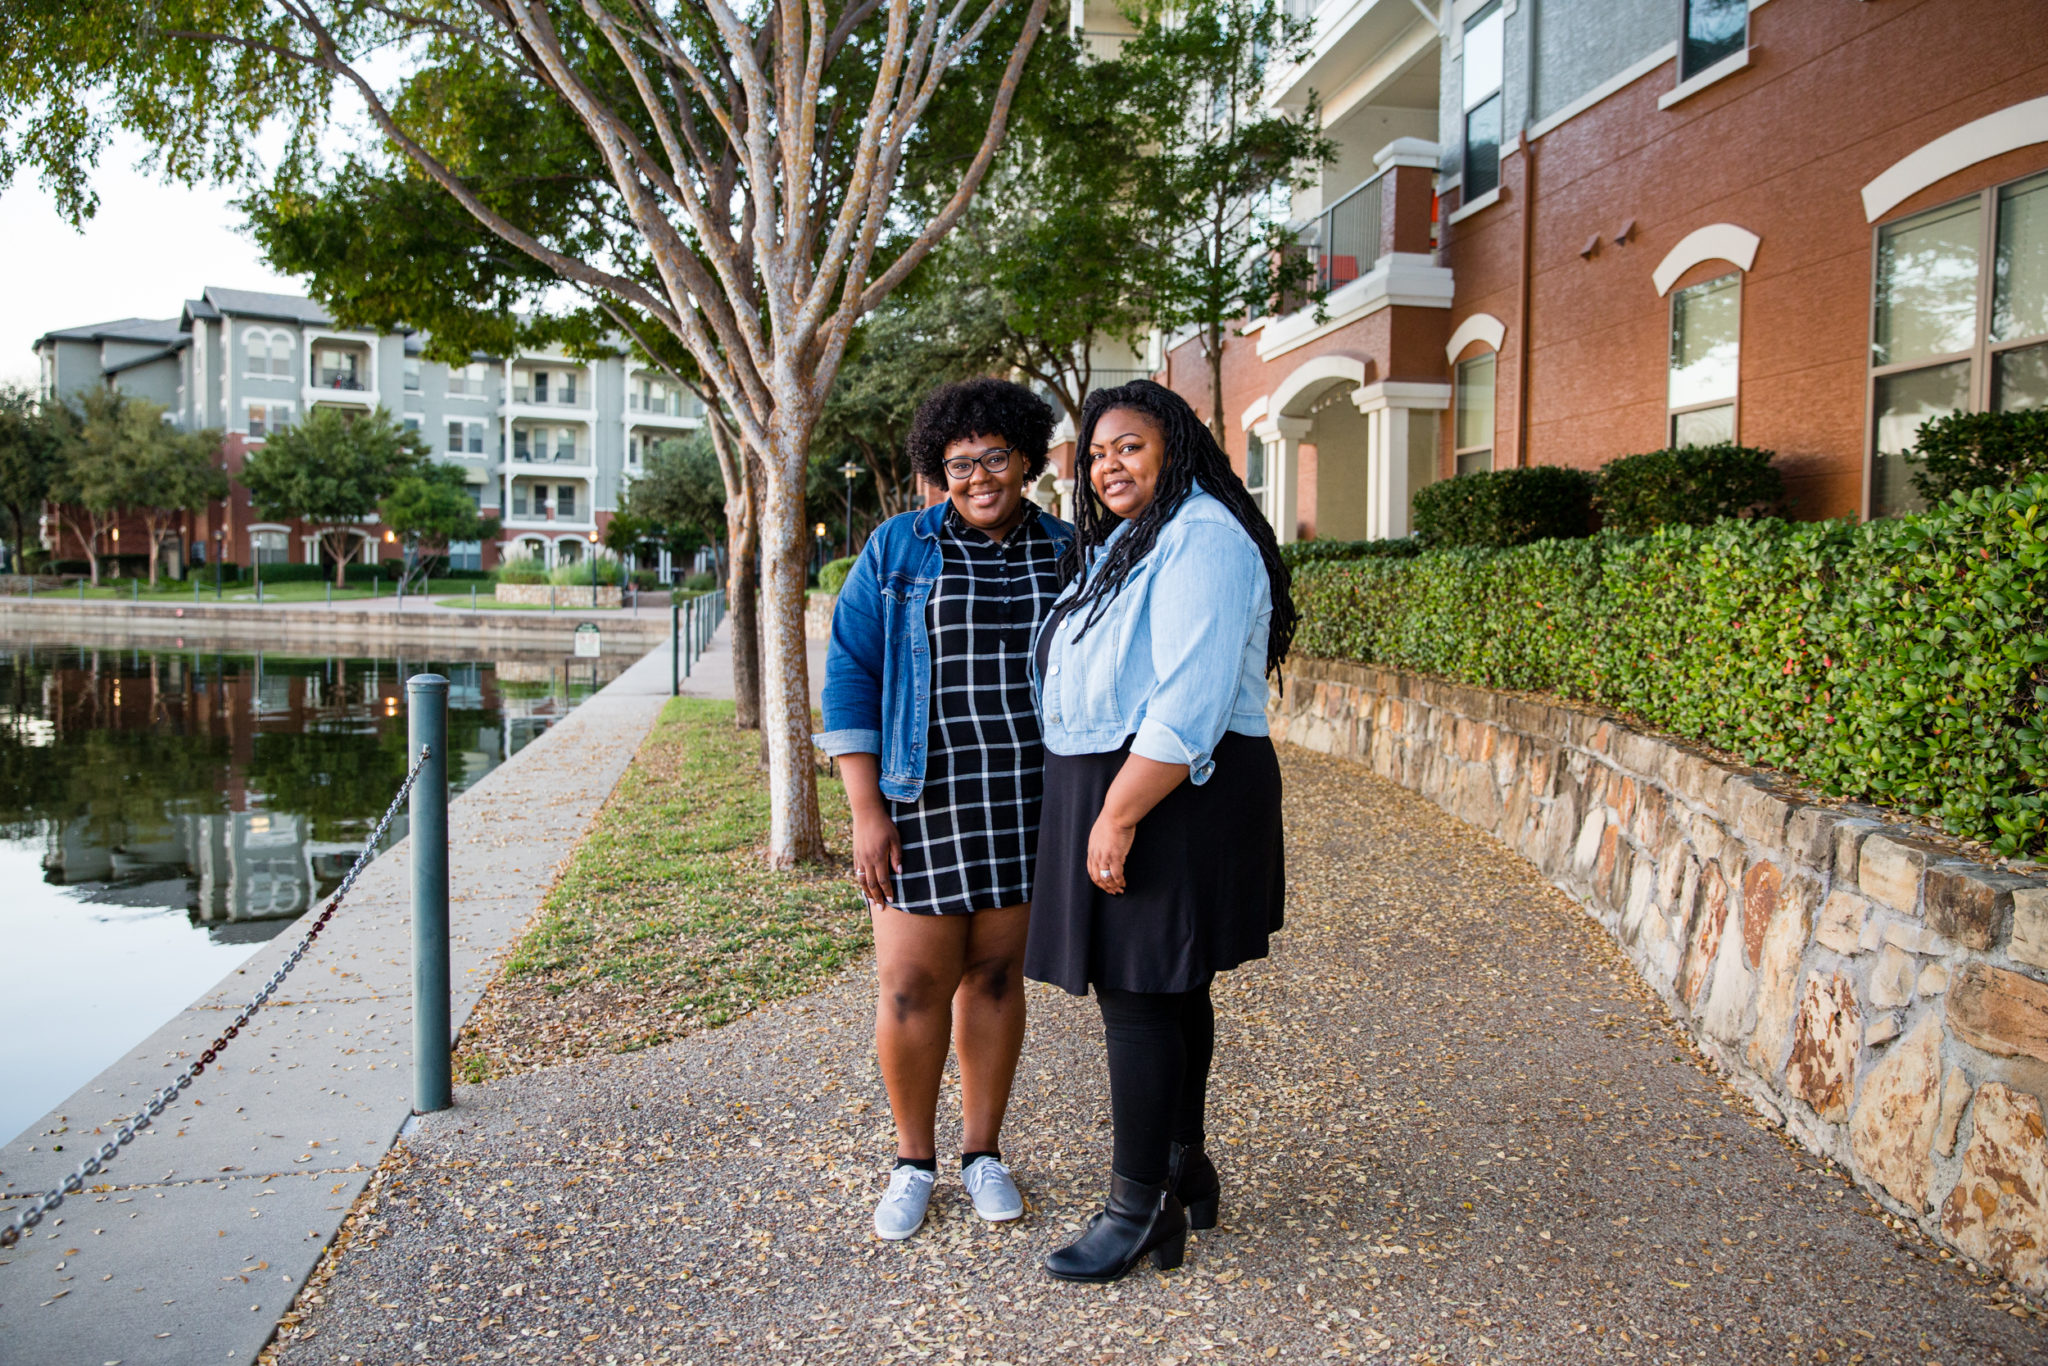 Sherica poses with her mom, Nina in front of their apartment complex in North Dallas.